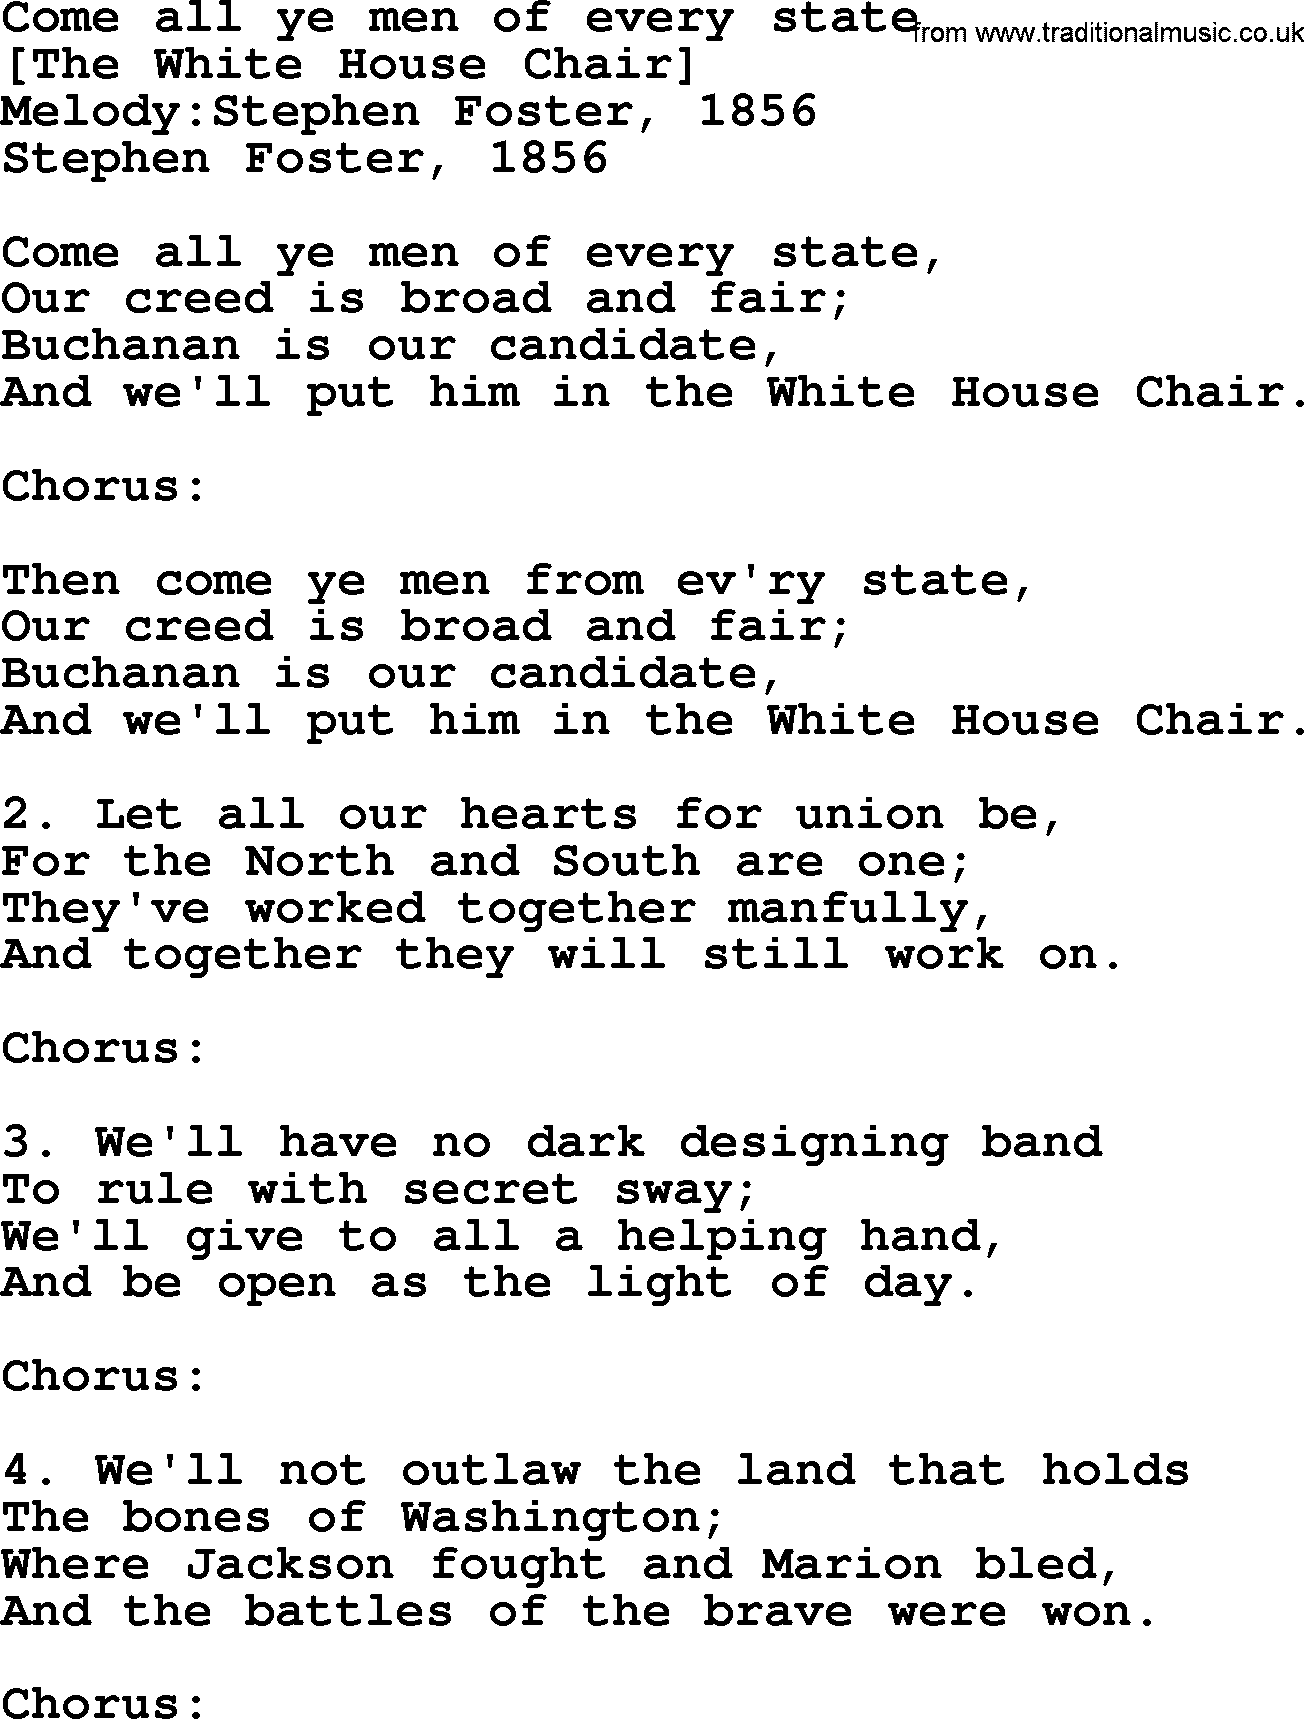 Old American Song: Come All Ye Men Of Every State, lyrics